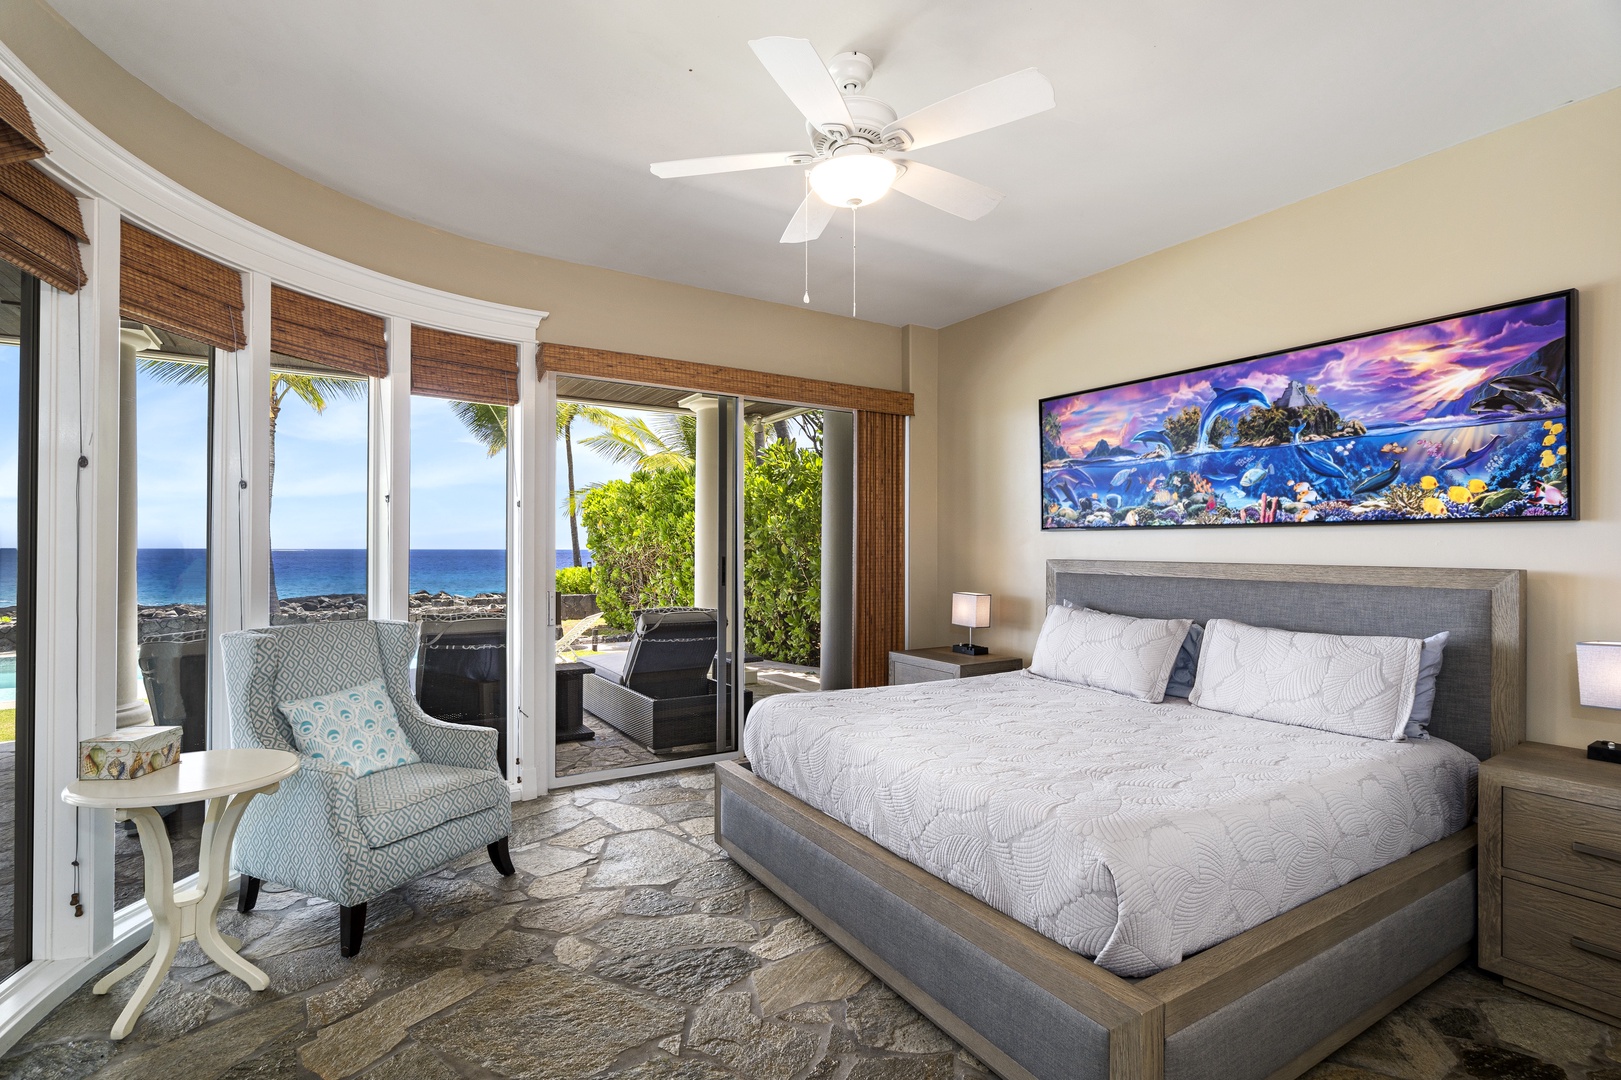 Kailua Kona Vacation Rentals, Kona Blue - Downstairs bedroom equipped with King bed, A/C and Lanai access